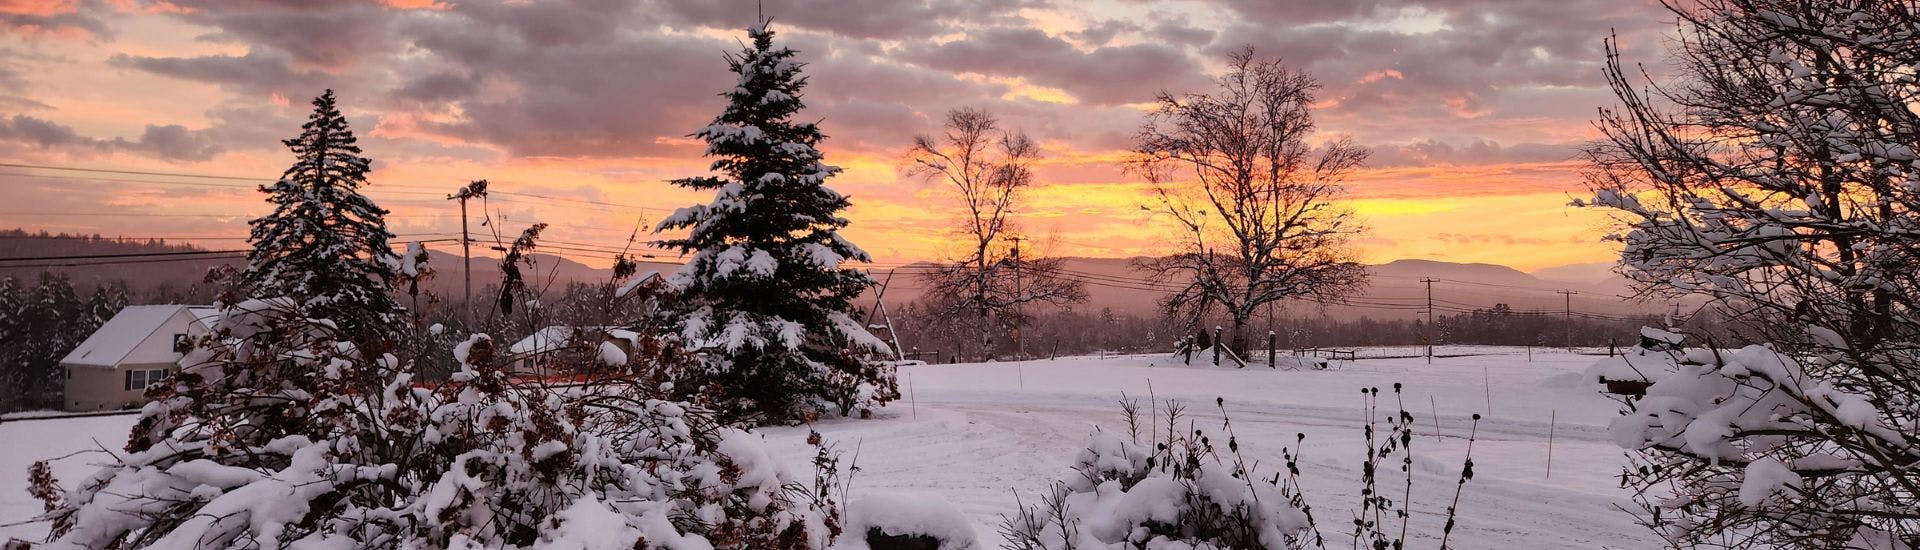 Large open field with freshly fallen snow on the ground and trees with an orange sunset sky